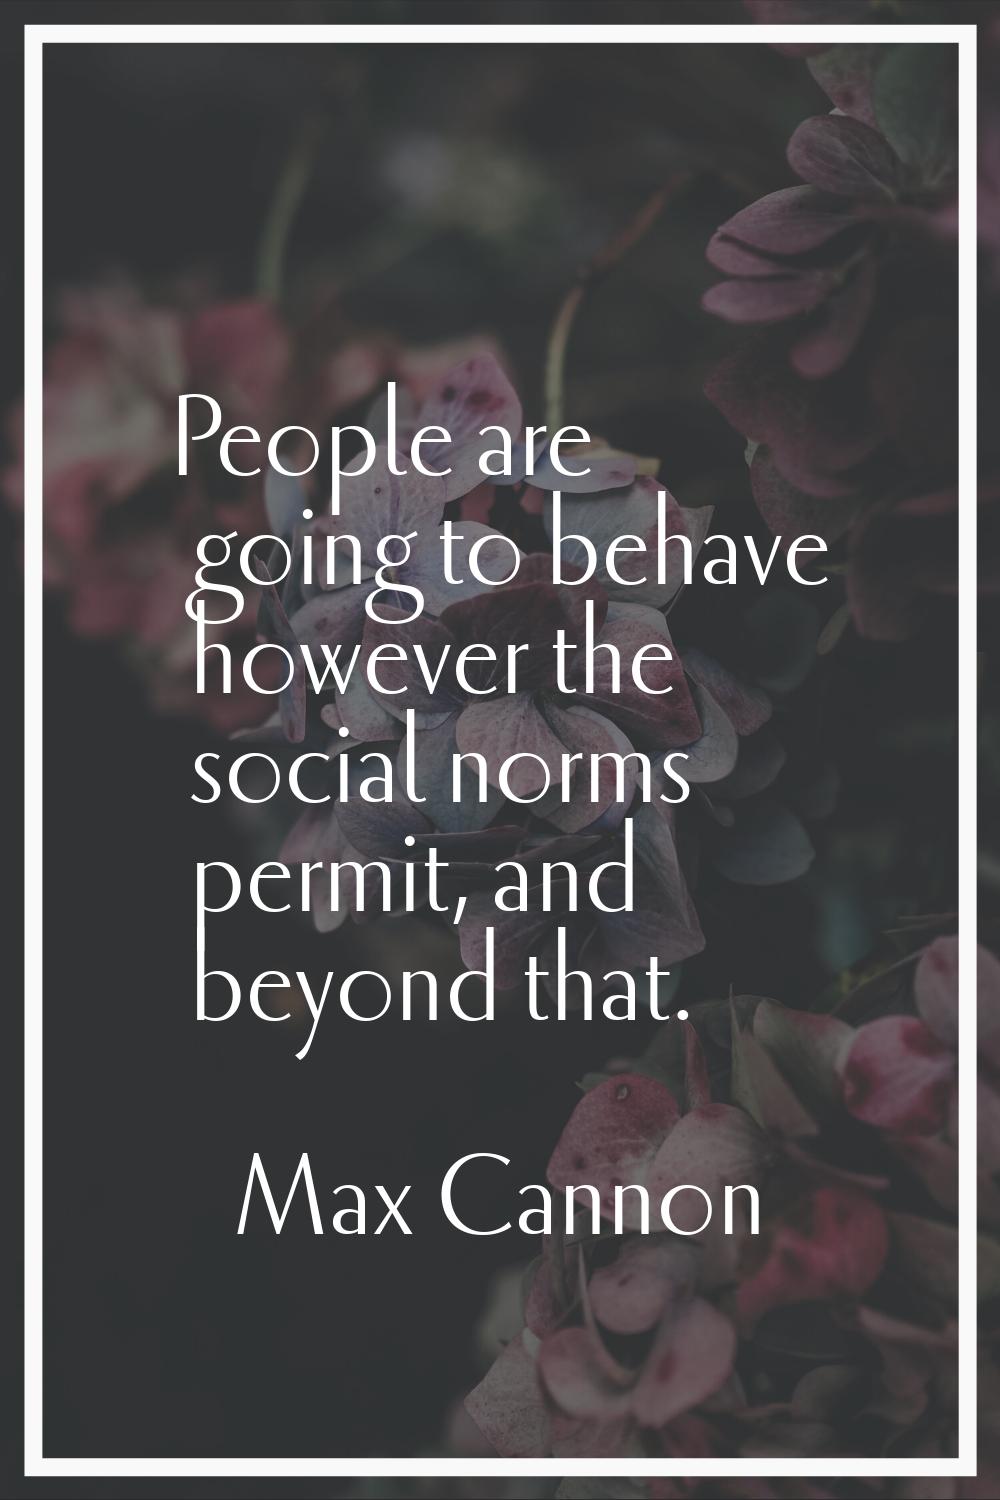 People are going to behave however the social norms permit, and beyond that.